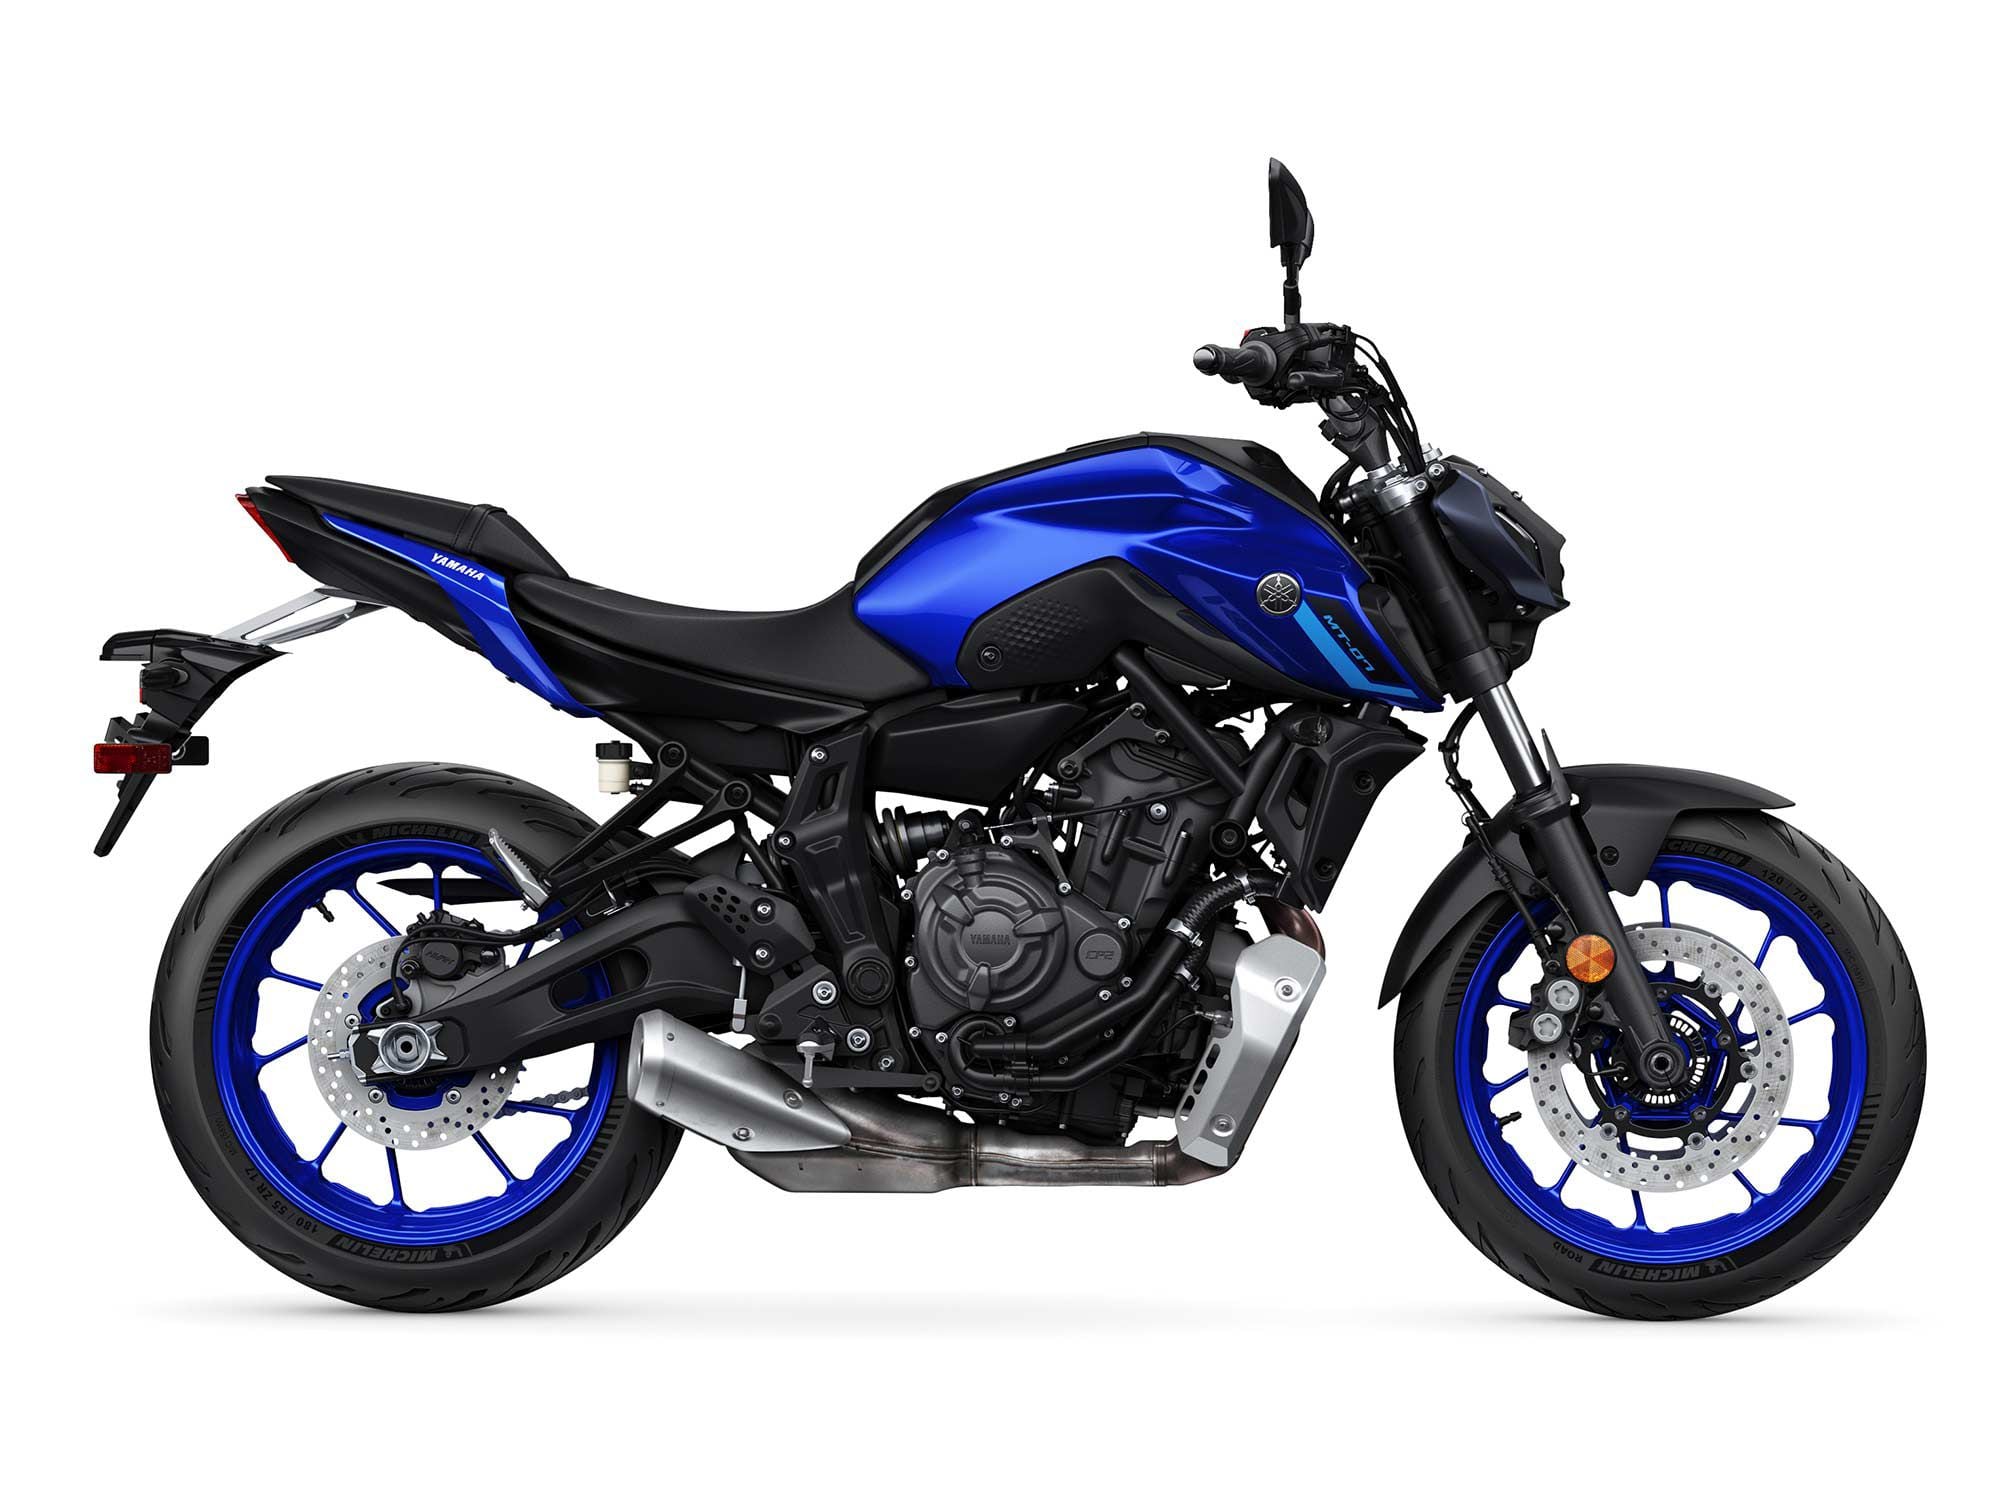 Two new Yamaha MT07 bikes added to our fleet - 3CMT Motorcycle